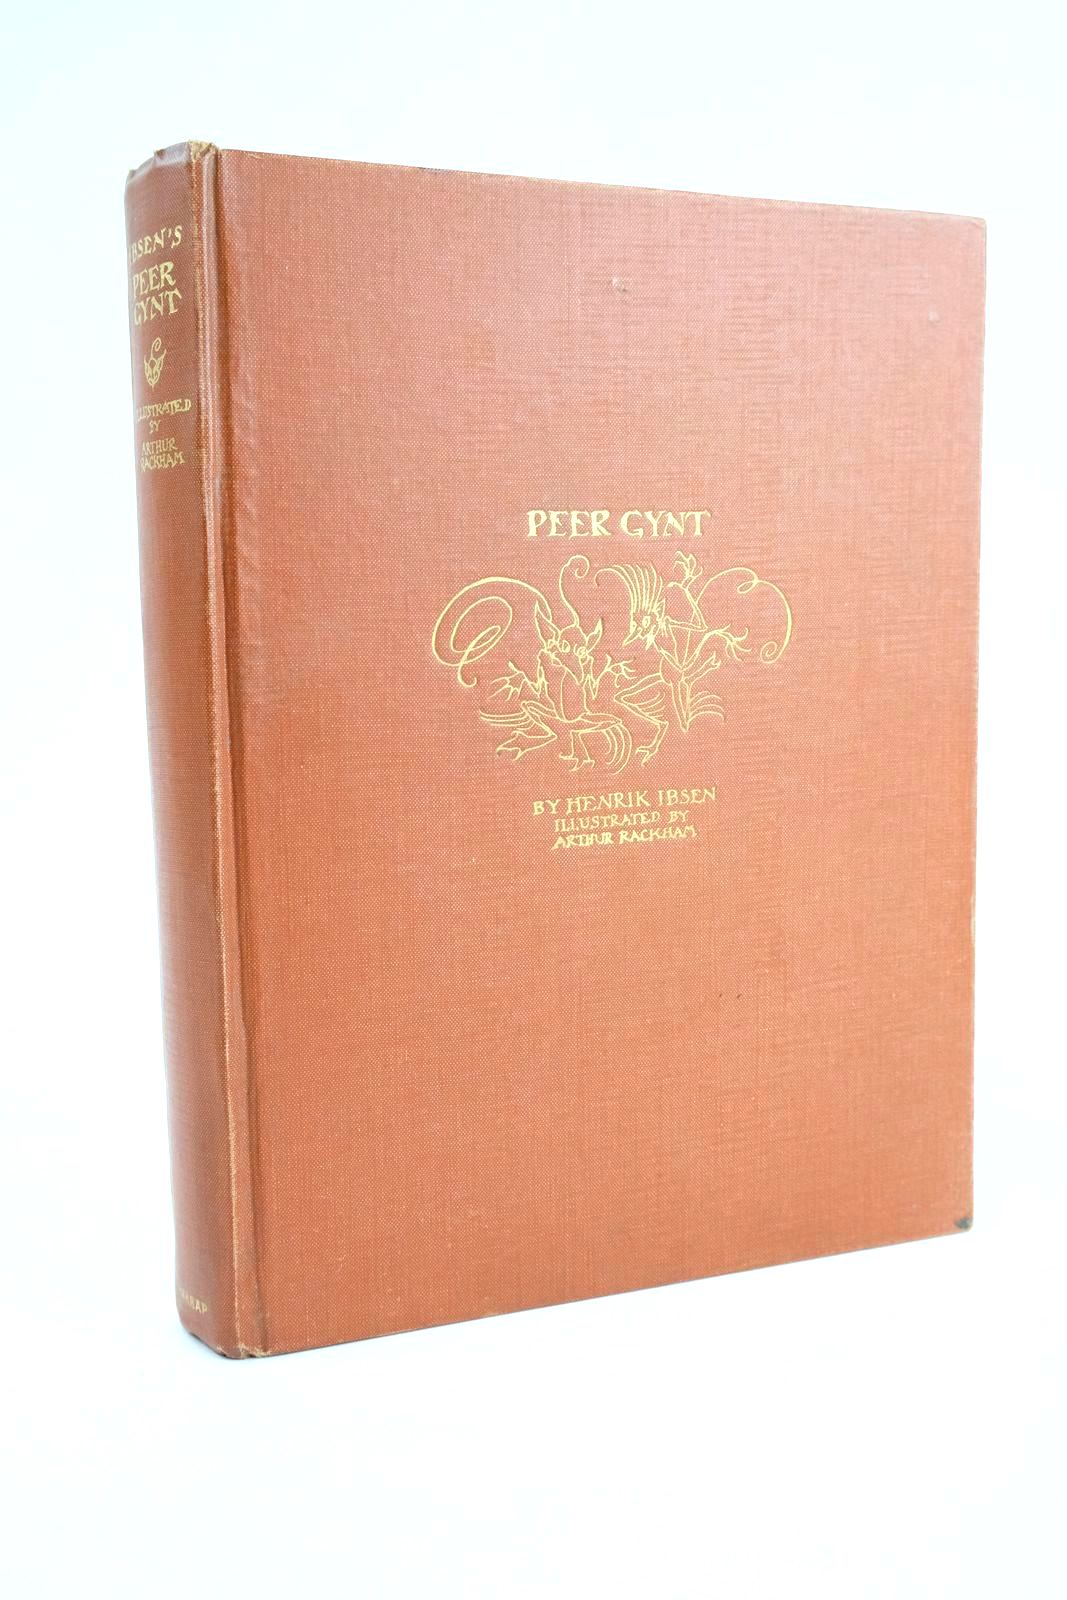 Photo of PEER GYNT written by Ibsen, Henrik illustrated by Rackham, Arthur published by George G. Harrap &amp; Co. Ltd. (STOCK CODE: 1323766)  for sale by Stella & Rose's Books